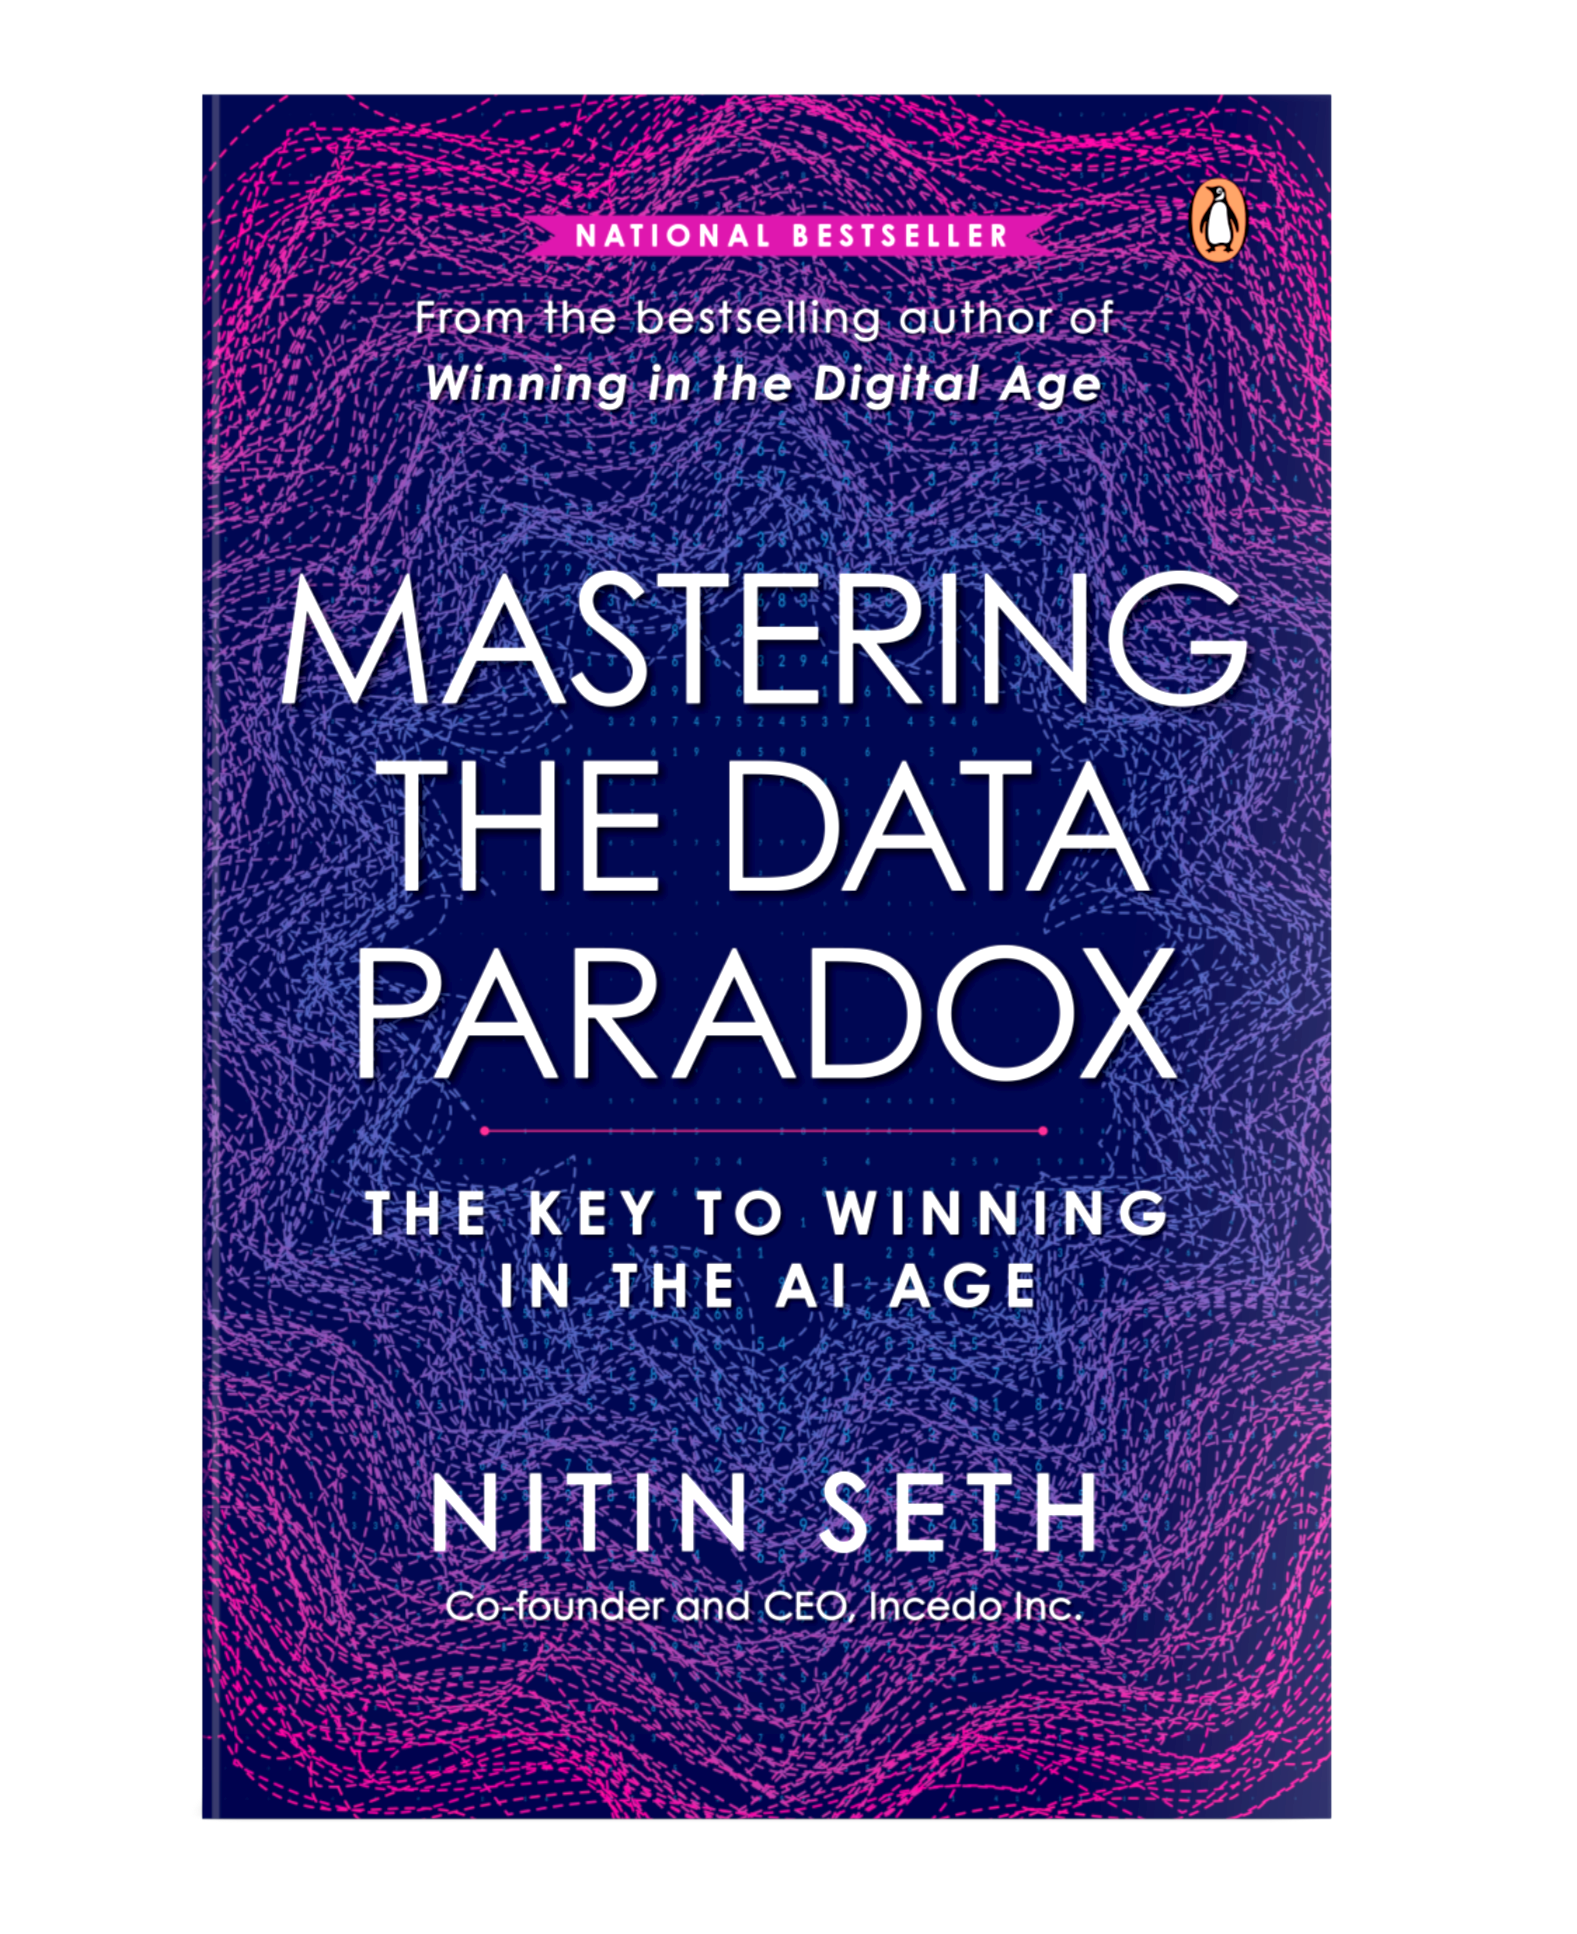 Renowned tech entrepreneur unveils his latest book: “Mastering the Data Paradox”